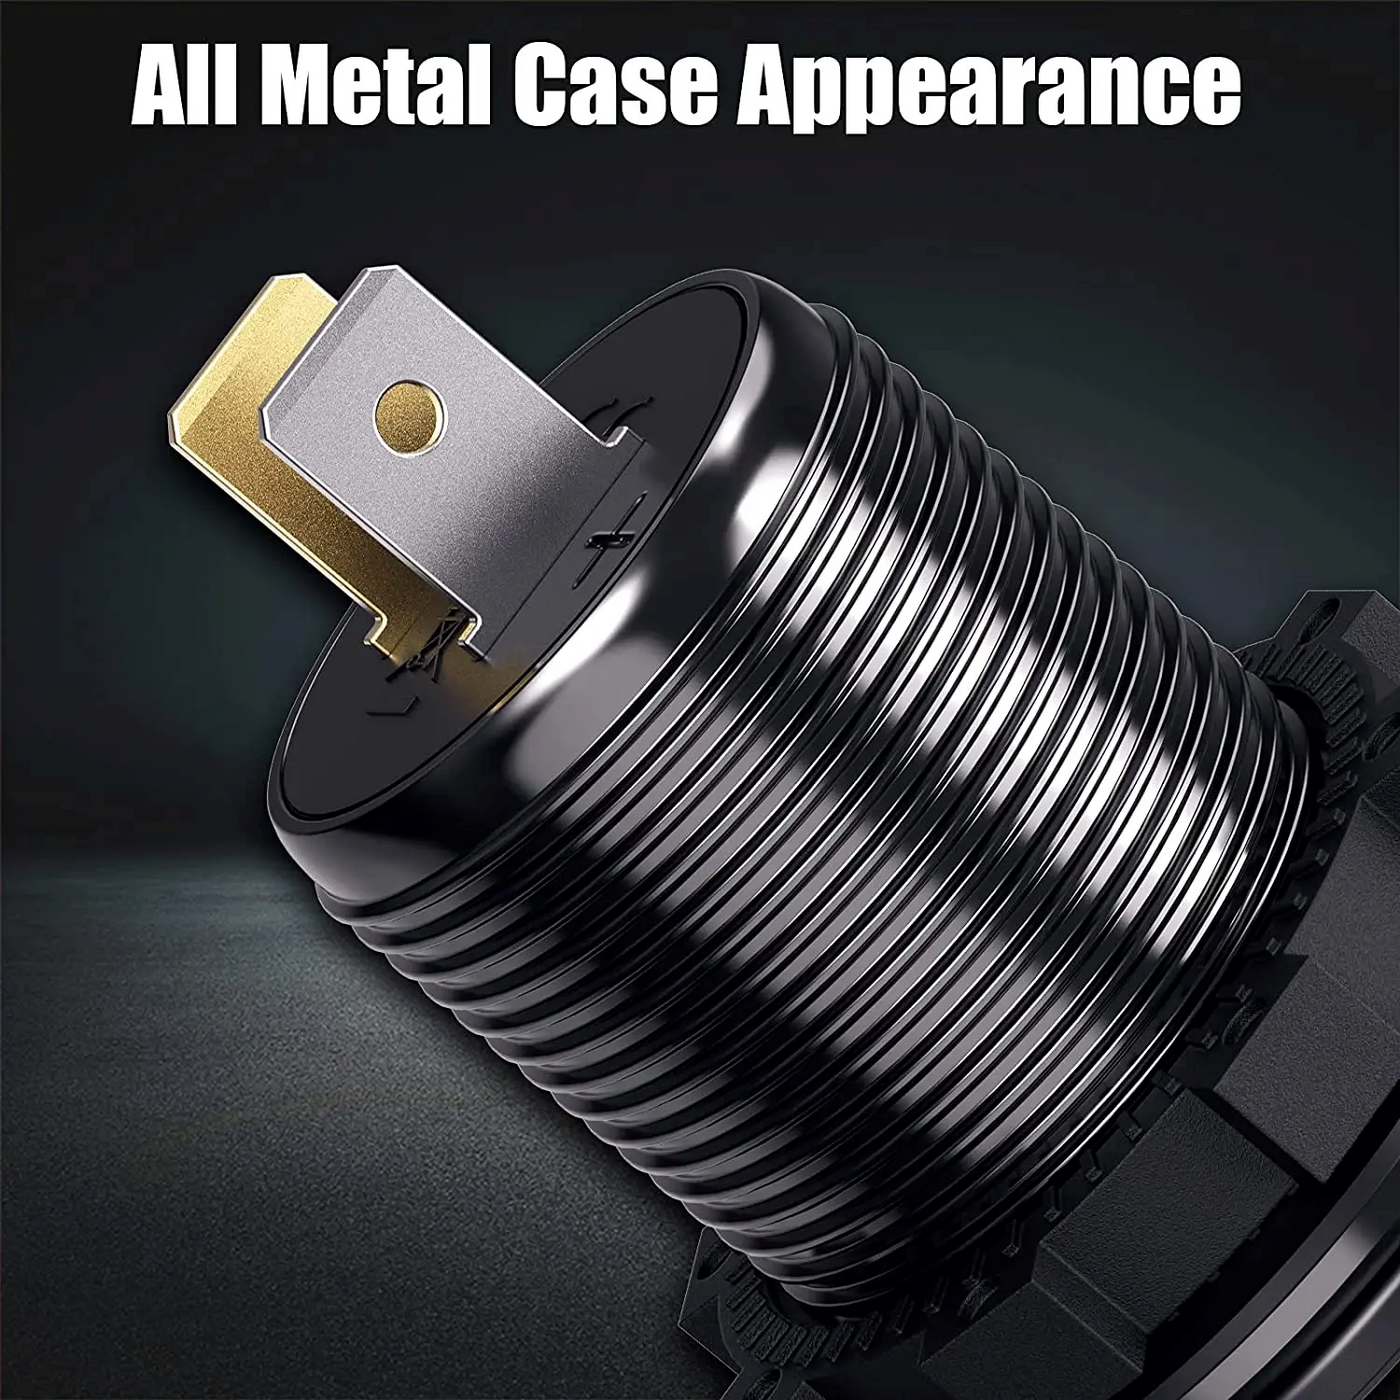 DS2013-P13 All Metal Case Appearance USB Charger